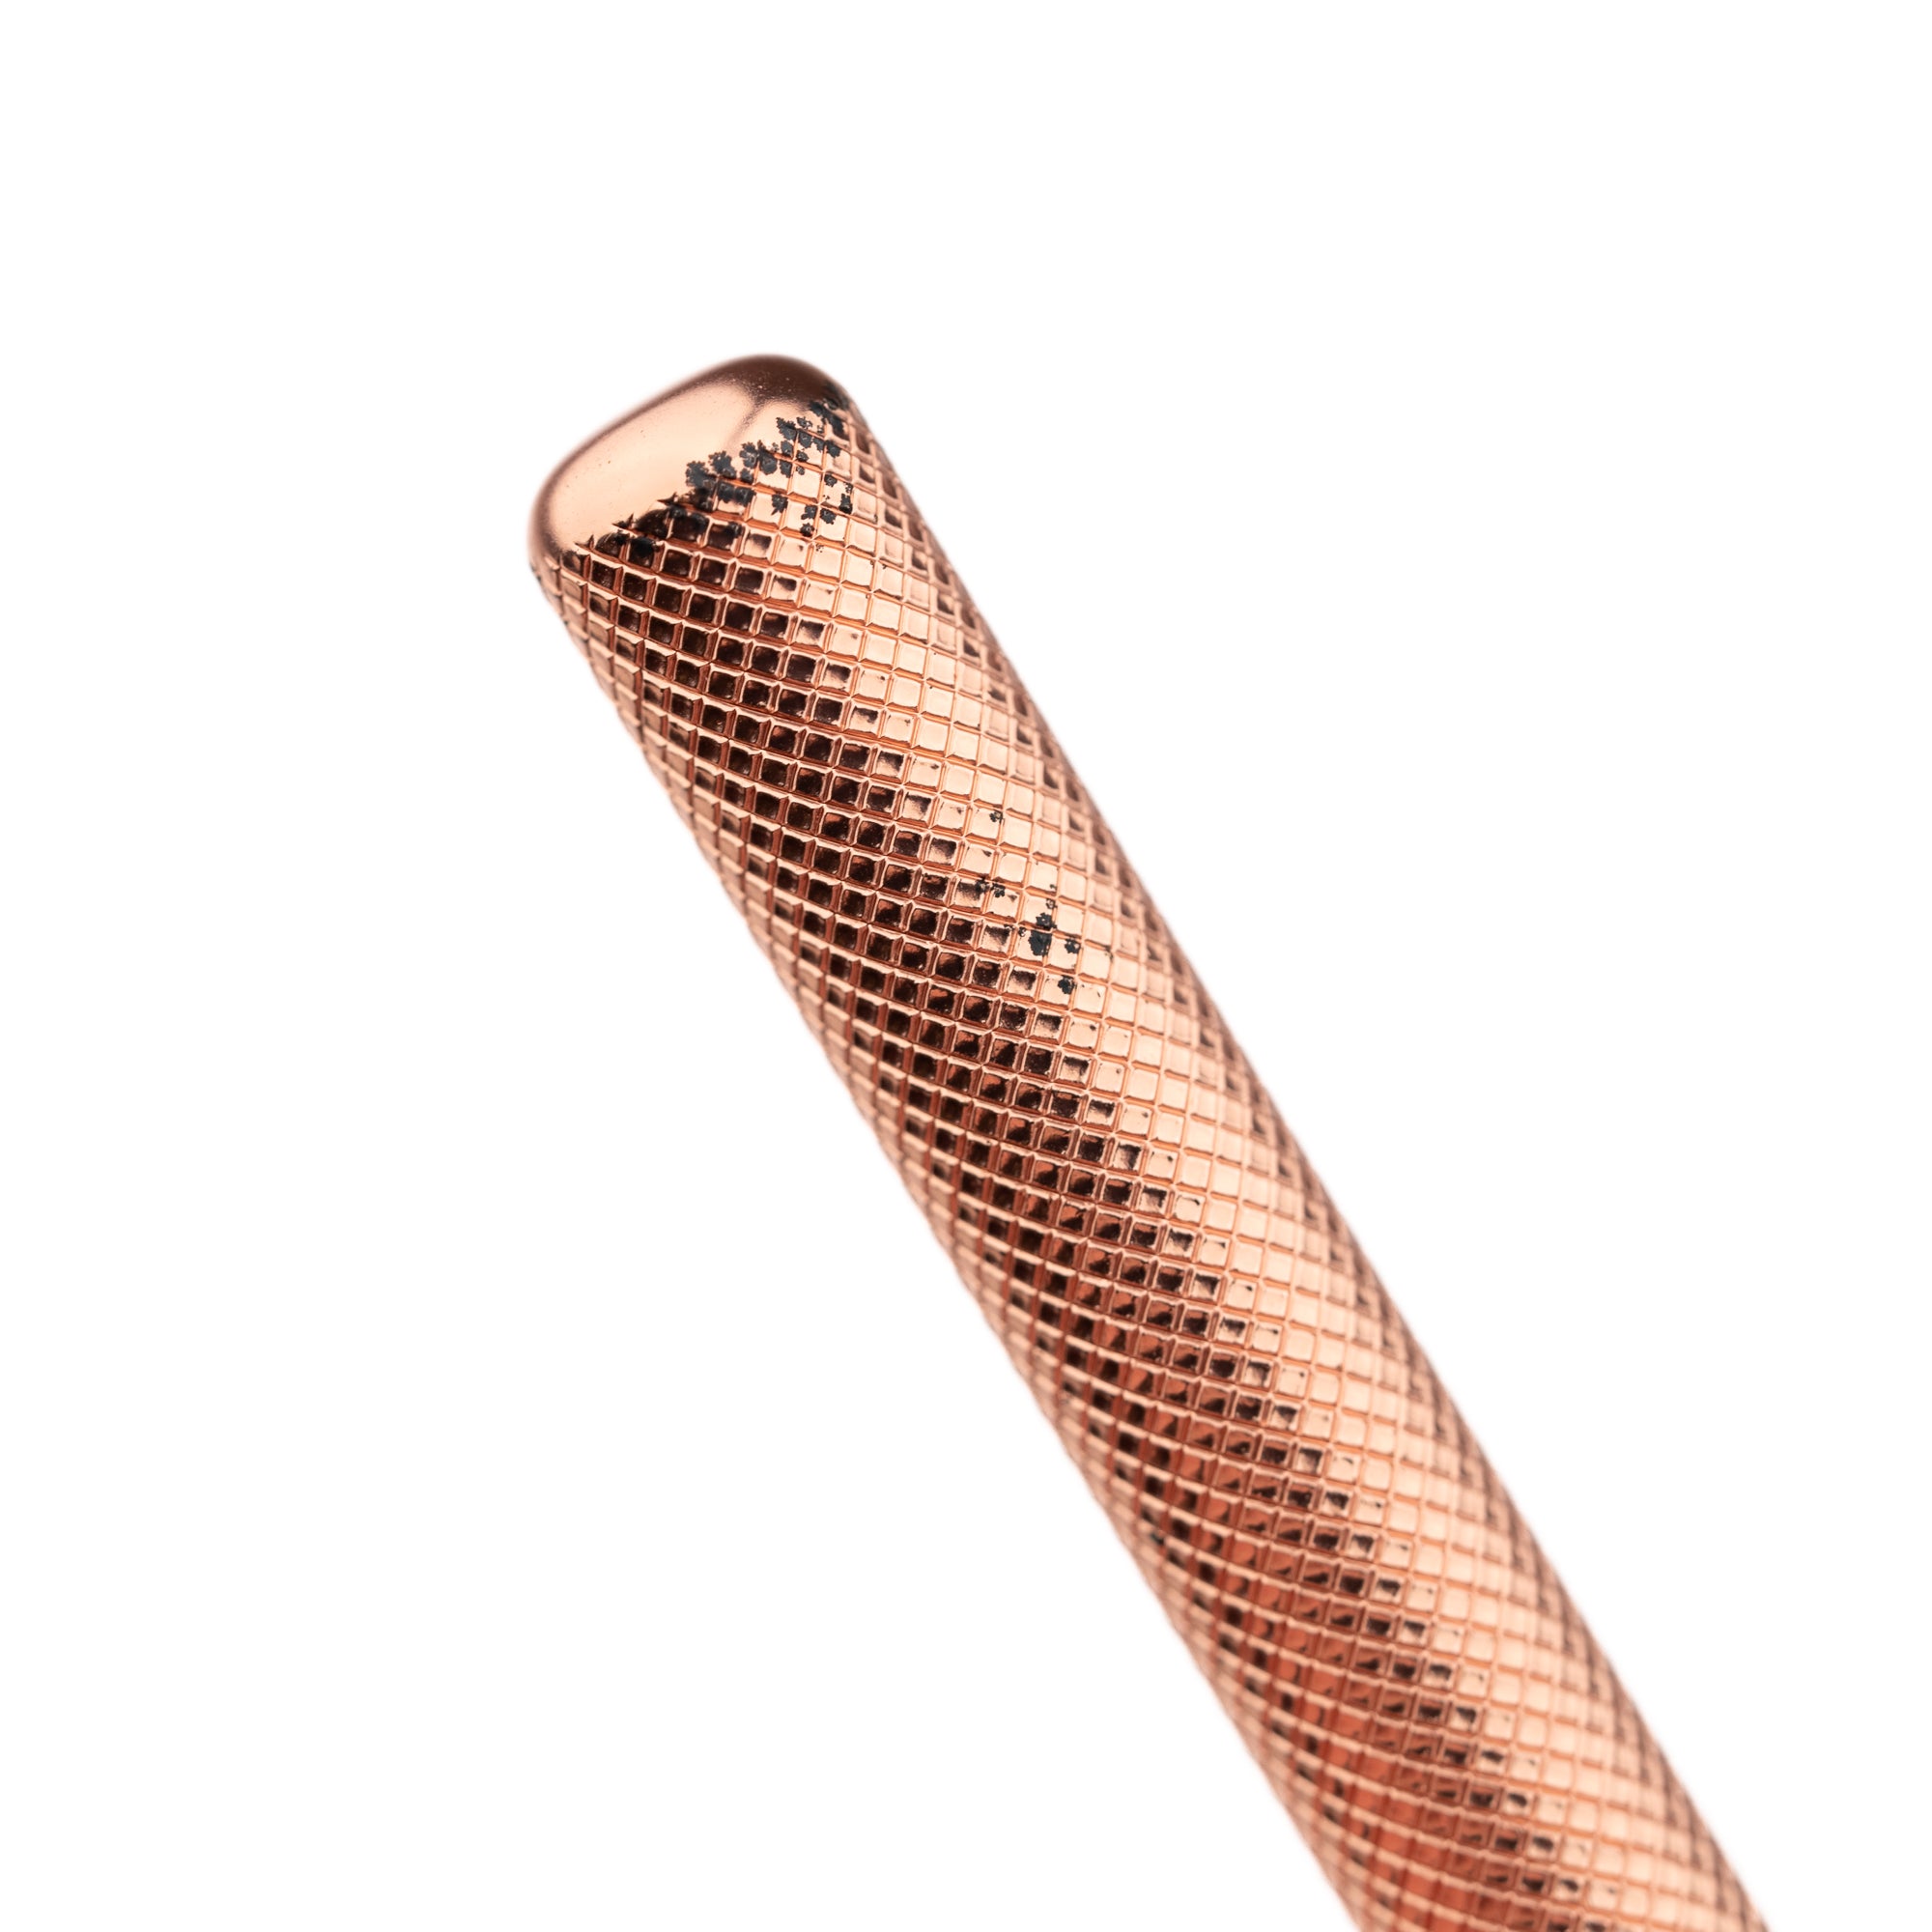 Less Than Perfect Hoxton Shave Co. Rose Gold DE Safety Razor